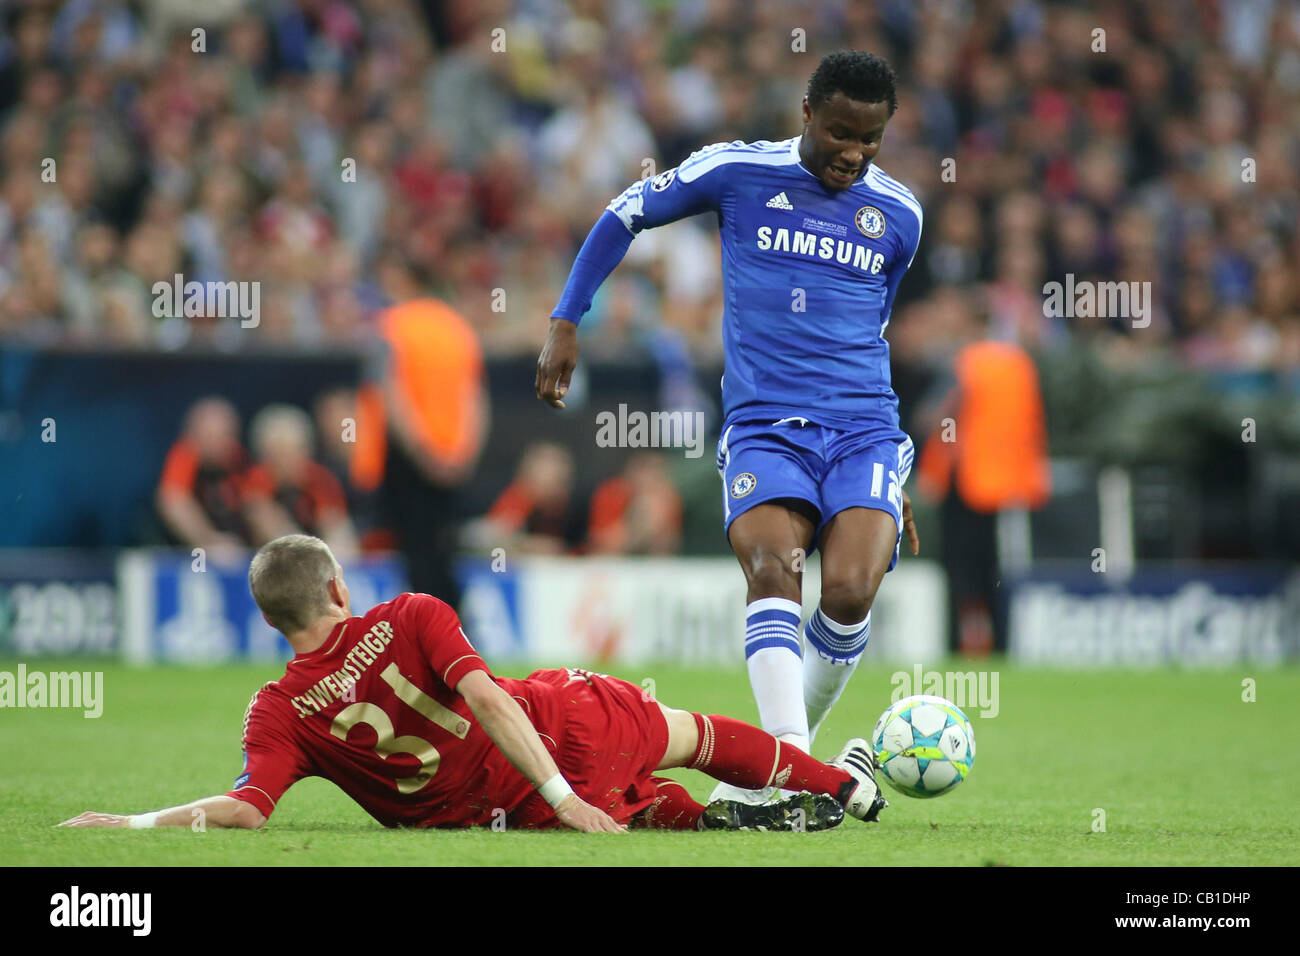 19/05/2012 Munich, Germany. Bayern's German midfielder Bastian Schweinsteiger  and Chelsea's Nigeria midfielder John Obi Mikel in action during the 2012 UEFA Champions League Final played at the Allianz Arena Munich, and contested by Englnd's Chelsea and Germany's Bayern Munich. Mandatory credit Mit Stock Photo